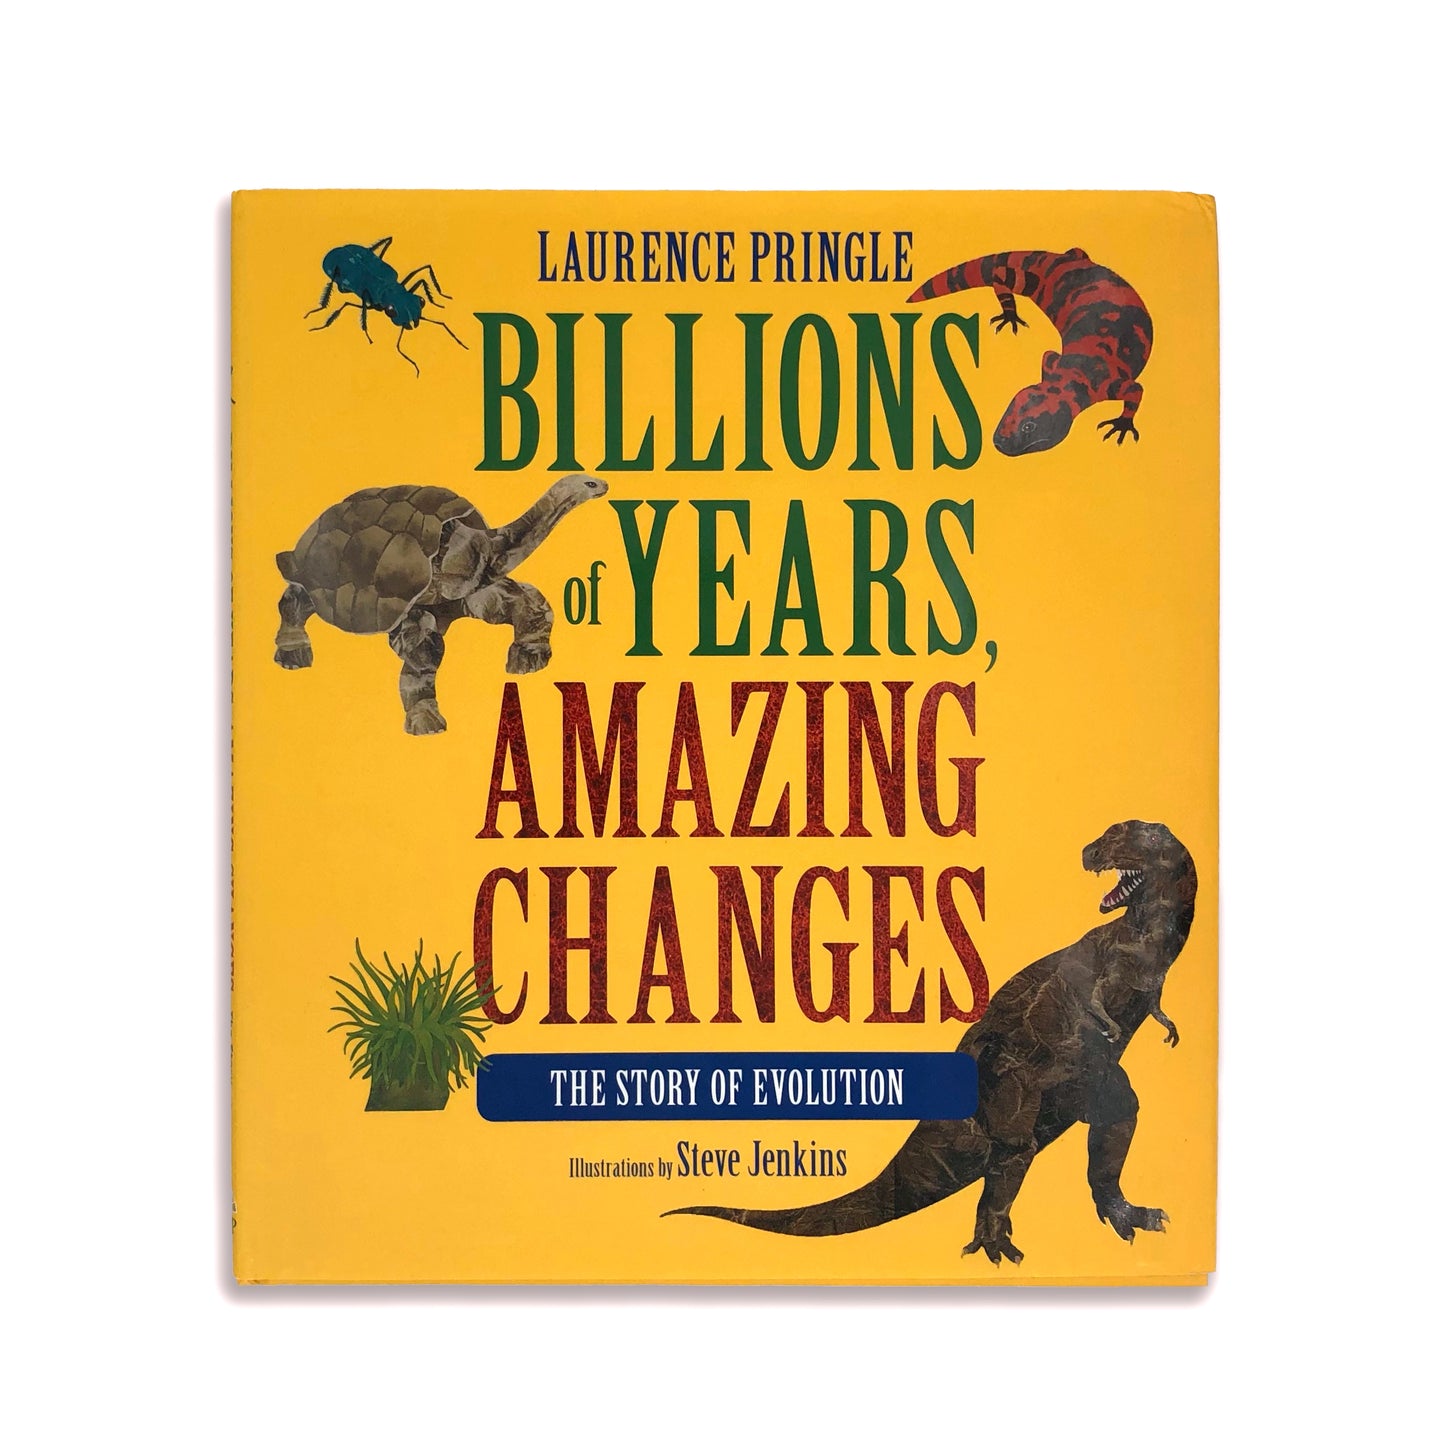 Billions of Years, Amazing Changes: The Story of Evolution - Laurence Pringle (hardcover)